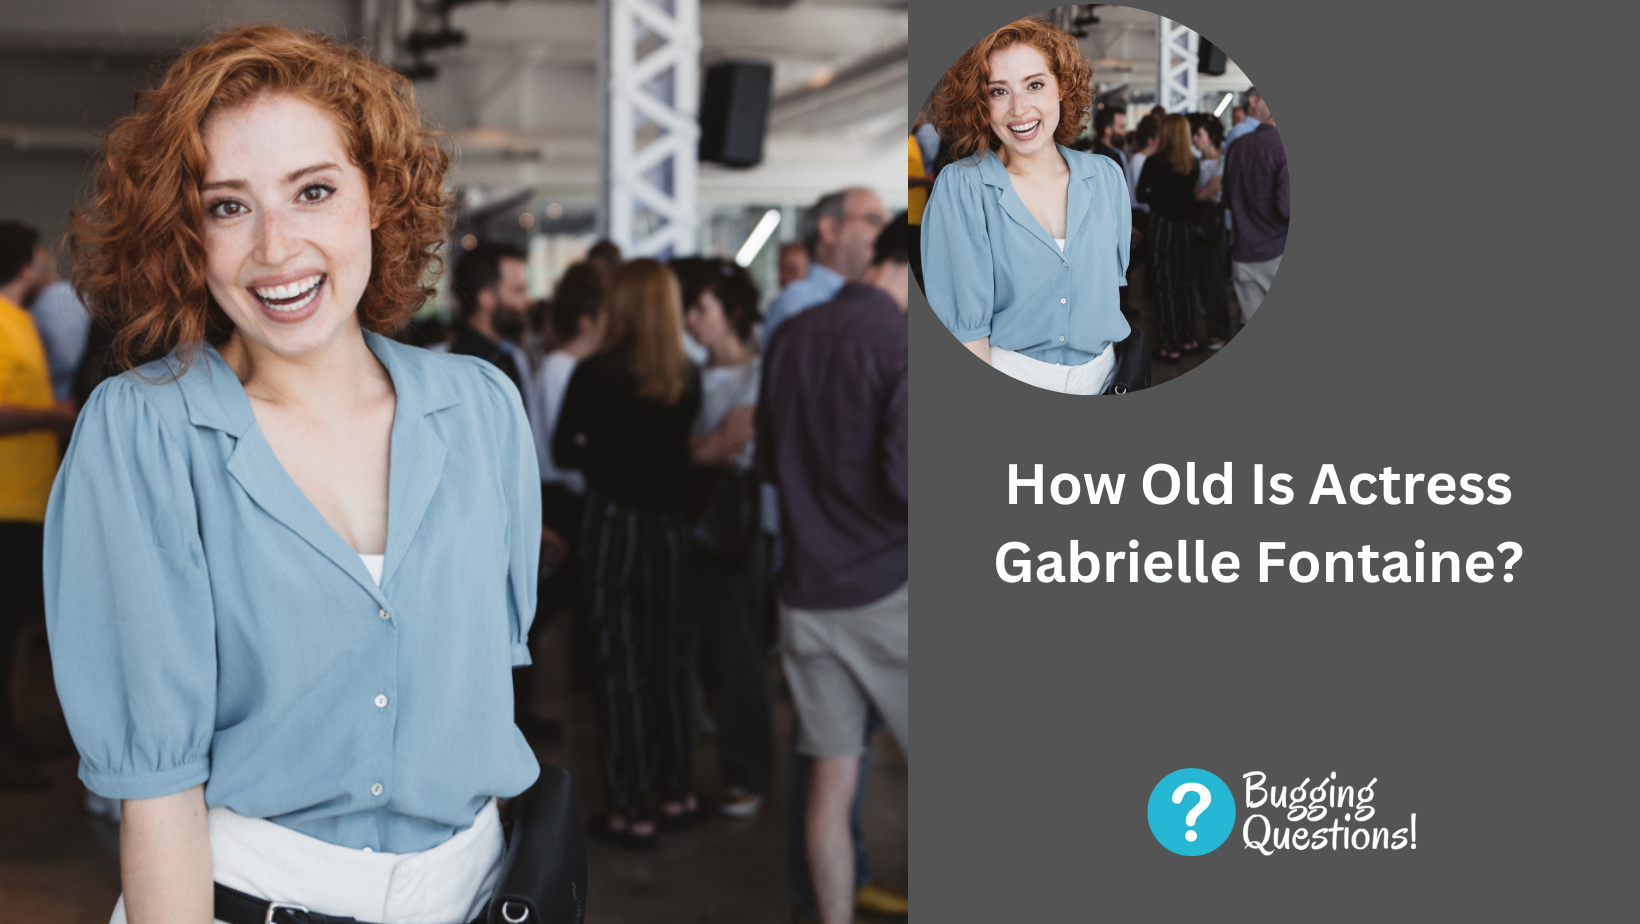 How Old Is Actress Gabrielle Fontaine?